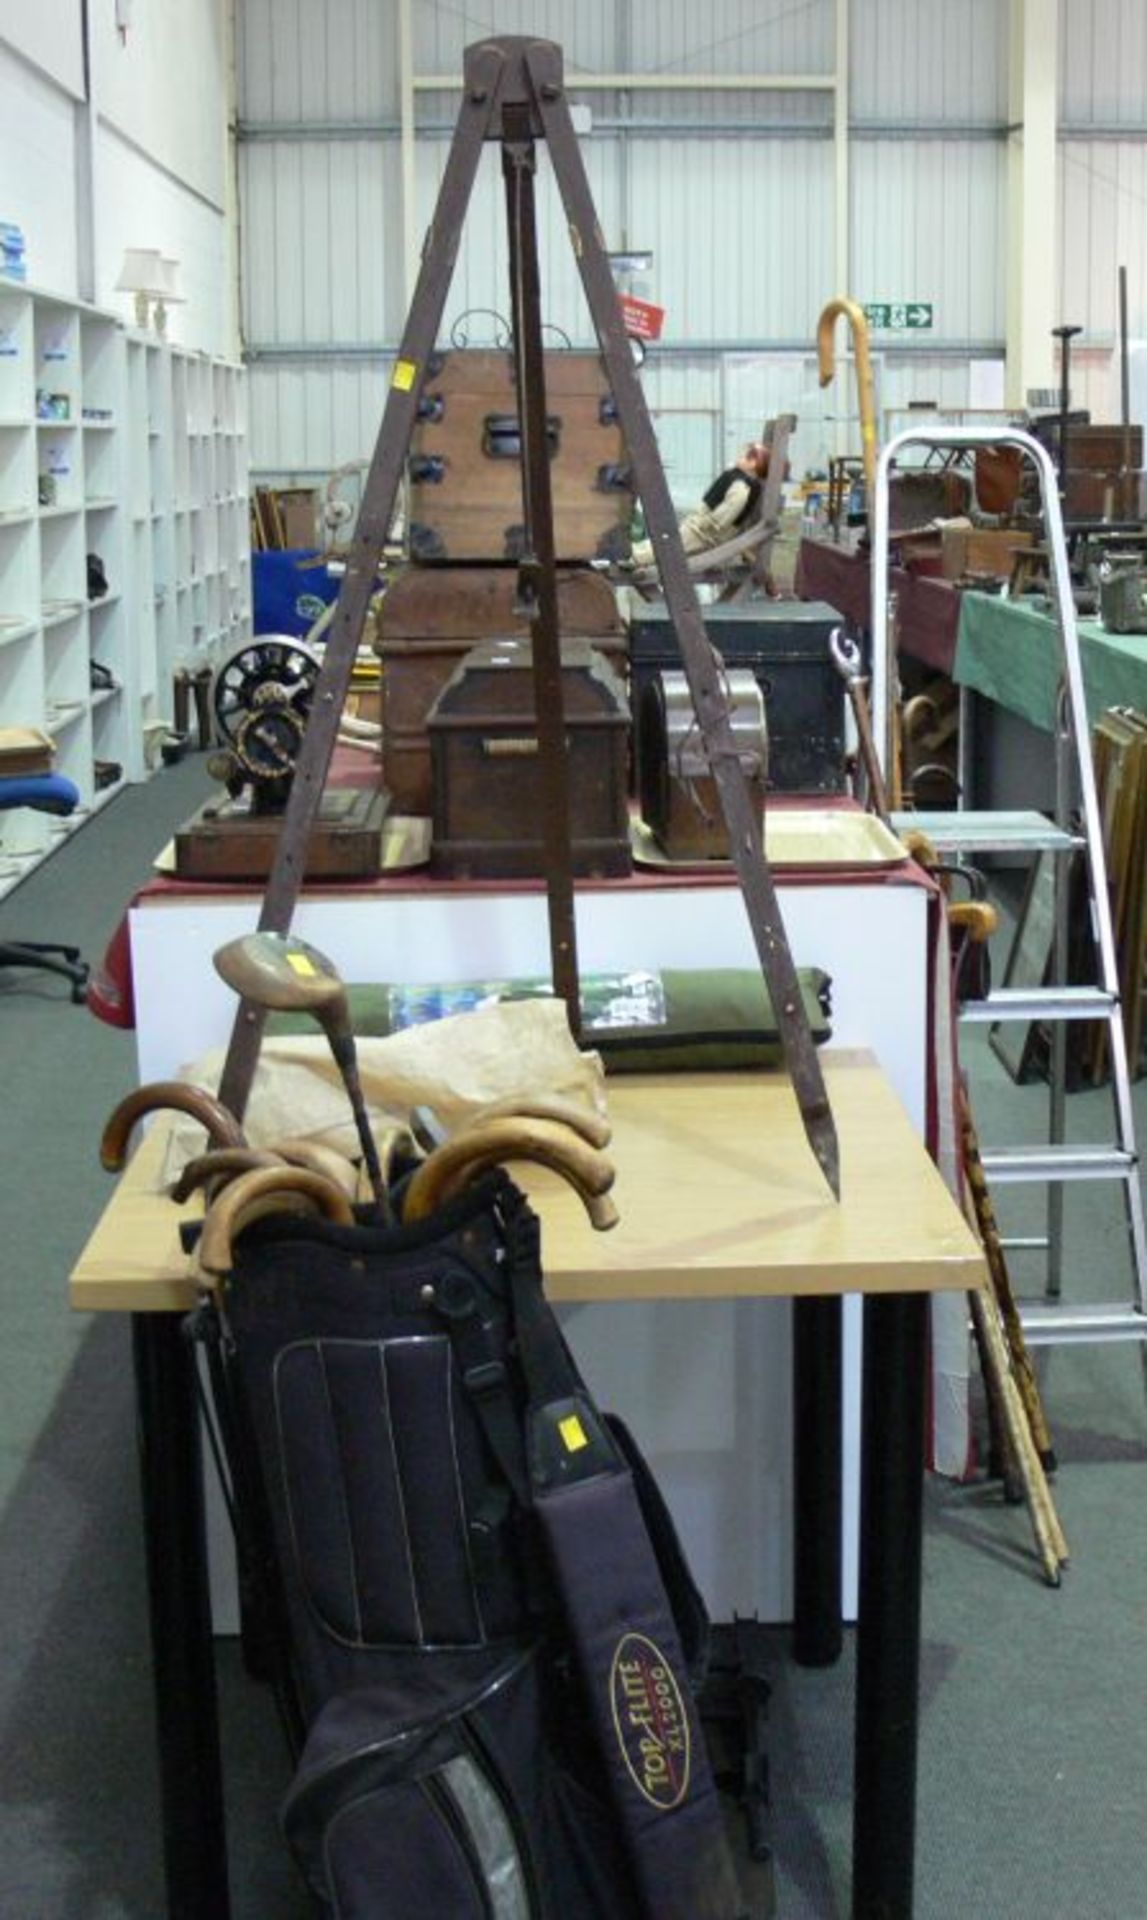 Large wooden Easel, Golf Bag and contents, Fishing Tent (in bag), Fishing Chair, Camping Pegs (